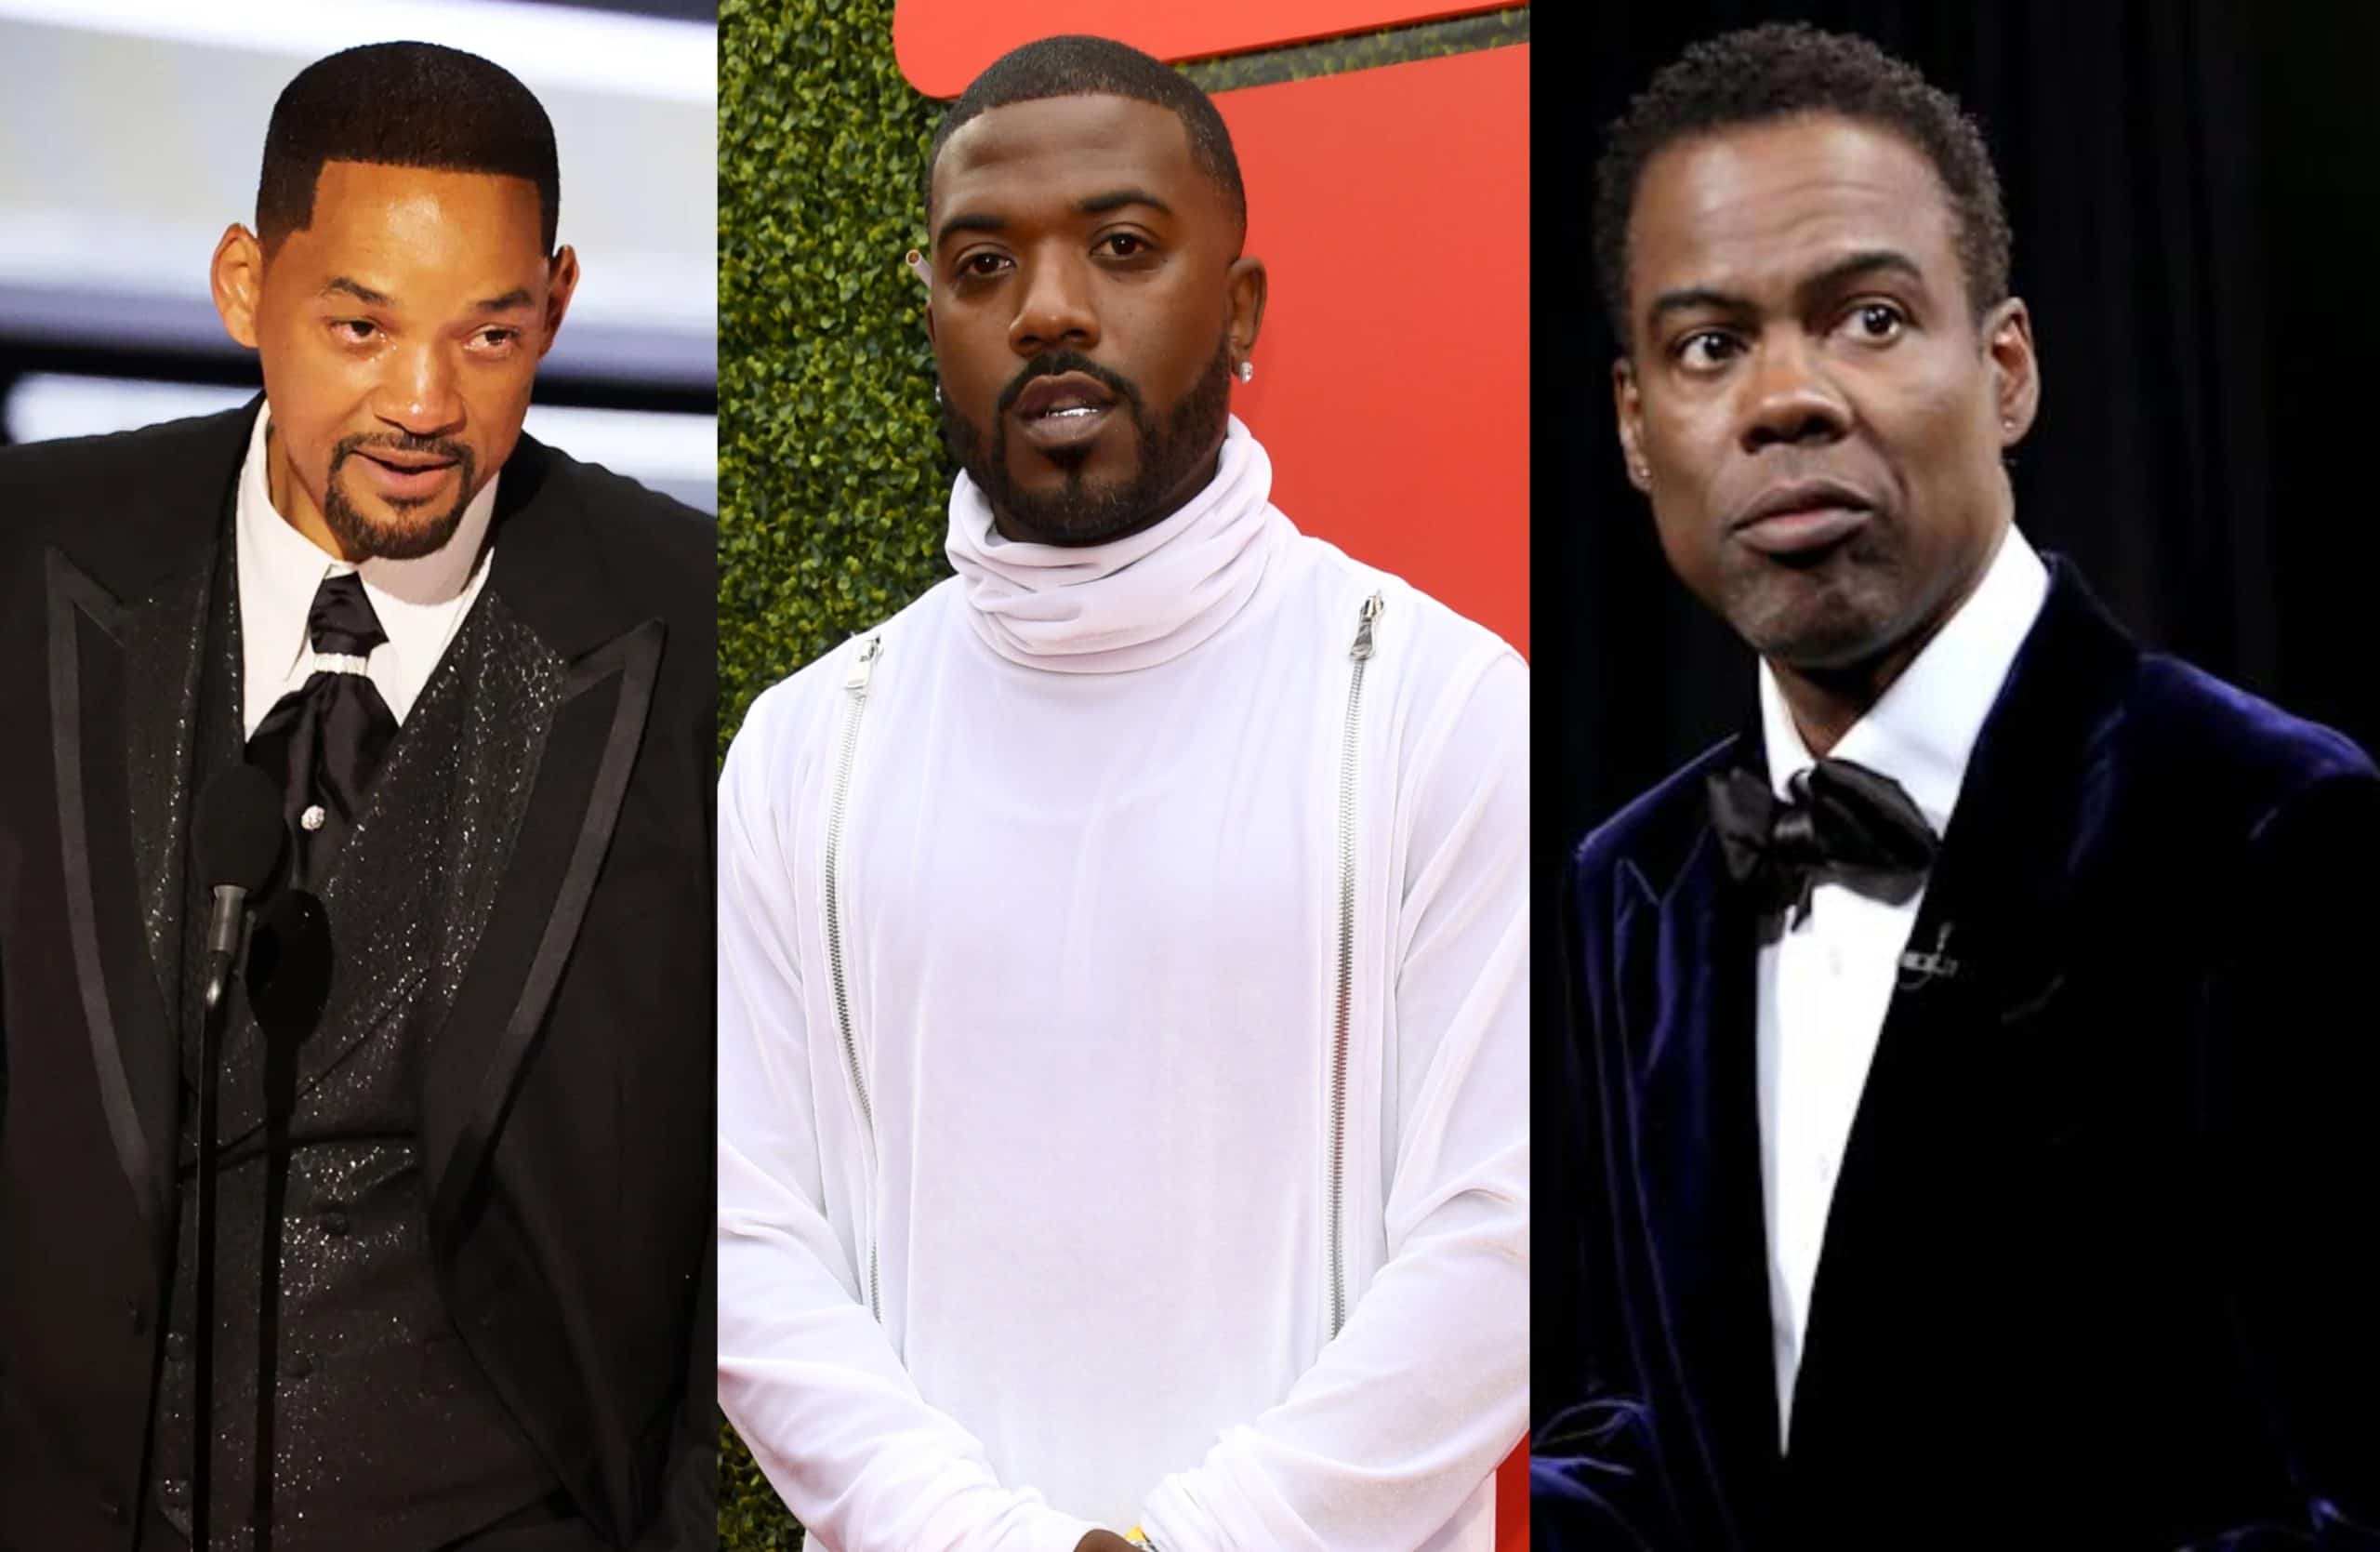 Ray J offered $50 Million each to Chris Rock And Will Smith To Fight In The Ring